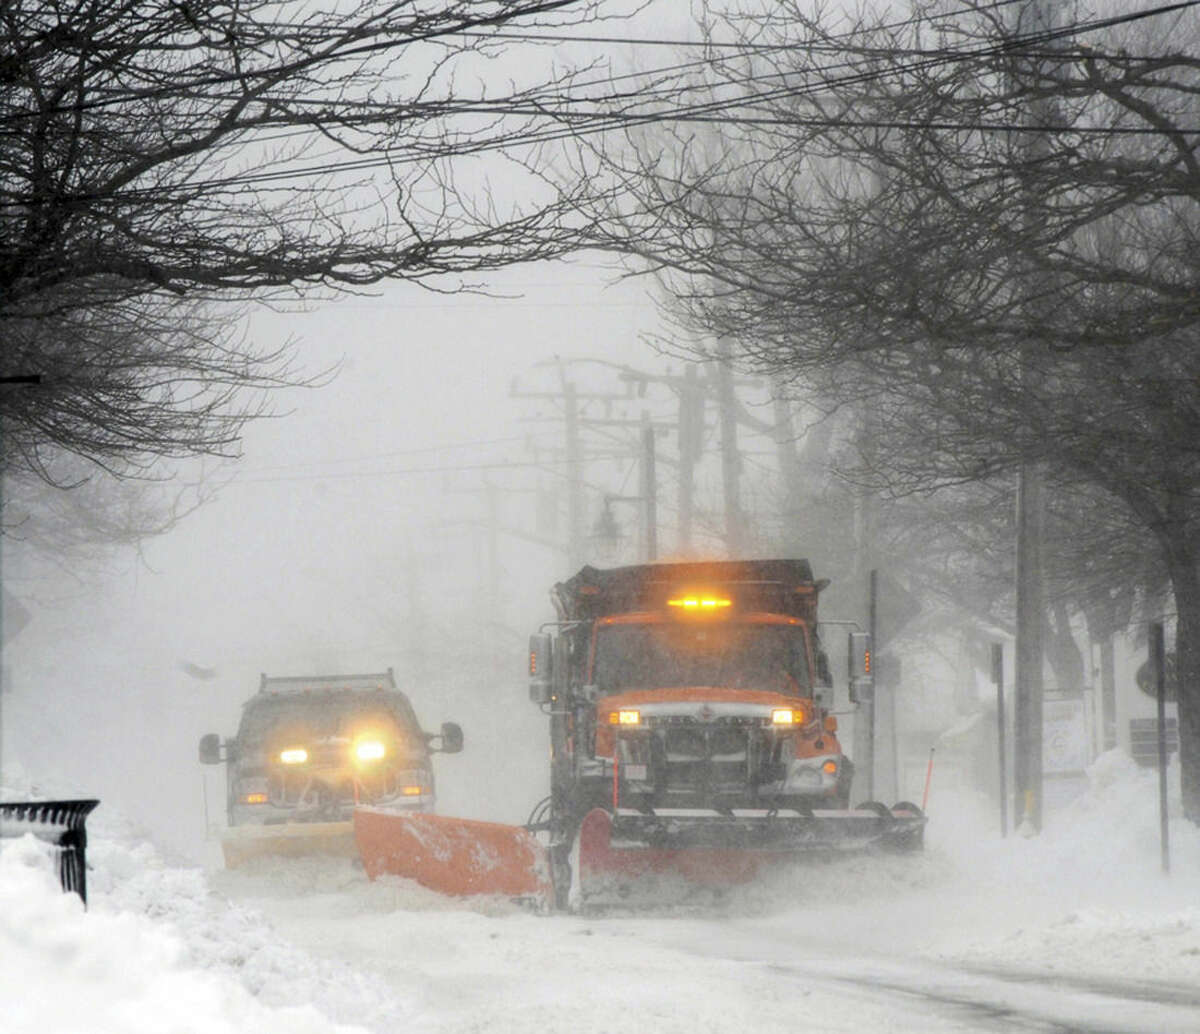 Plows move snow off Main street in Hyannis, Mass., Monday, Feb. 8, 2016. A wind-driven winter storm brought blizzard conditions to Cape Cod and threatened to drop up to 18 inches of snow on southeastern Massachusetts on Monday. (Ron Schloerb/The Cape Cod Times via AP)